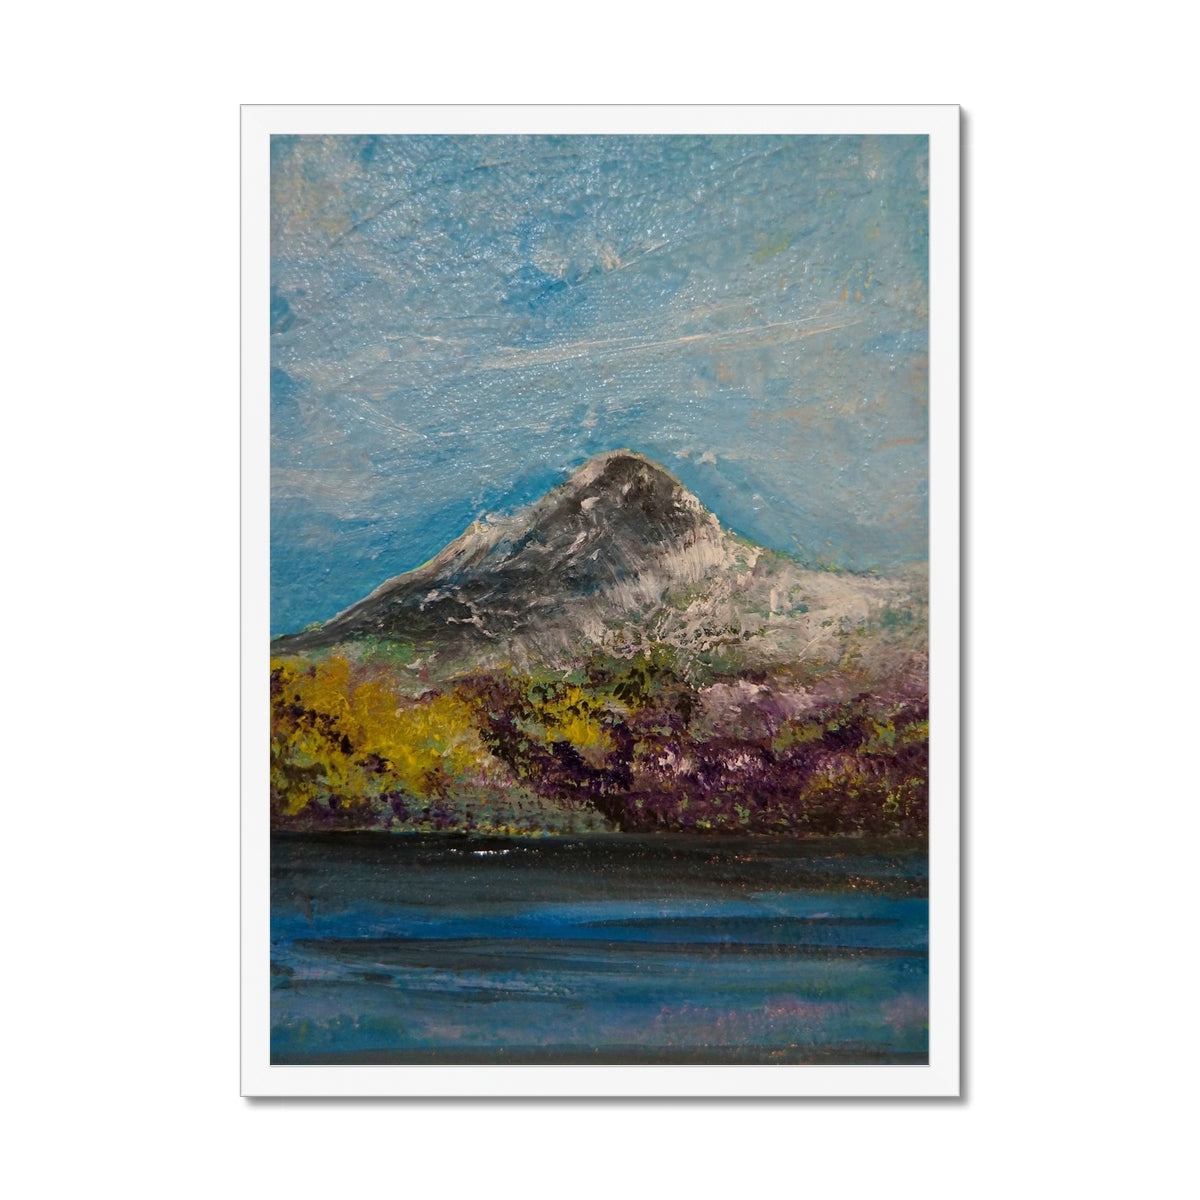 Ben Lomond ii Painting | Framed Prints From Scotland-Framed Prints-Scottish Lochs & Mountains Art Gallery-A2 Portrait-White Frame-Paintings, Prints, Homeware, Art Gifts From Scotland By Scottish Artist Kevin Hunter